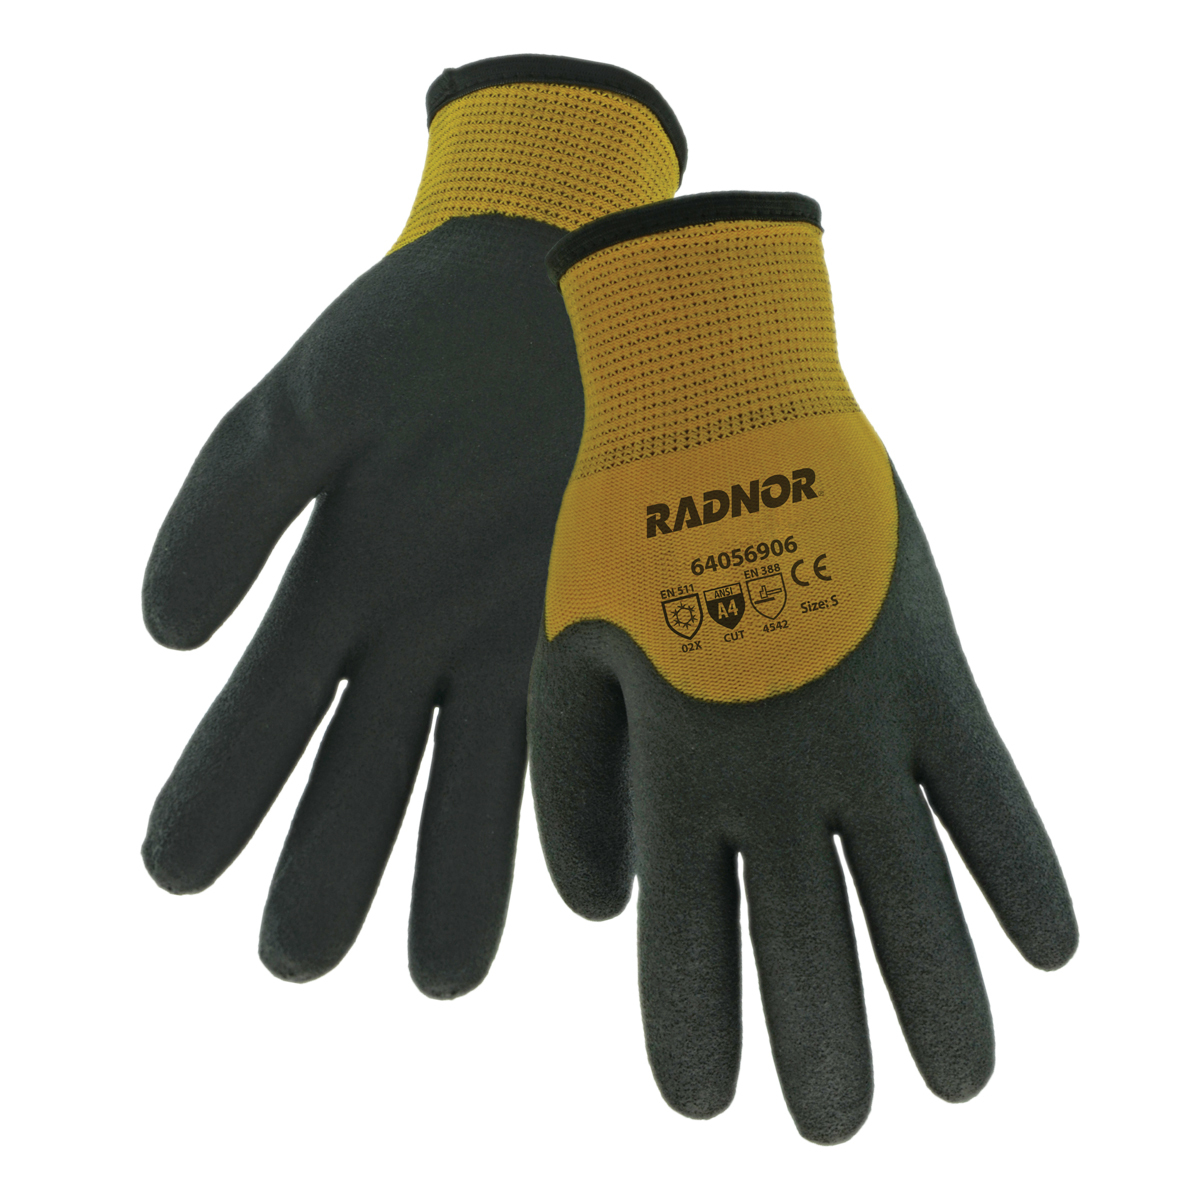 Radwear Size L Plastic Assembly and Box Handling Utility Reusable Gloves in  Hi-Viz Yellow and Black (Pack of 12) - RWG10L - Pollardwater